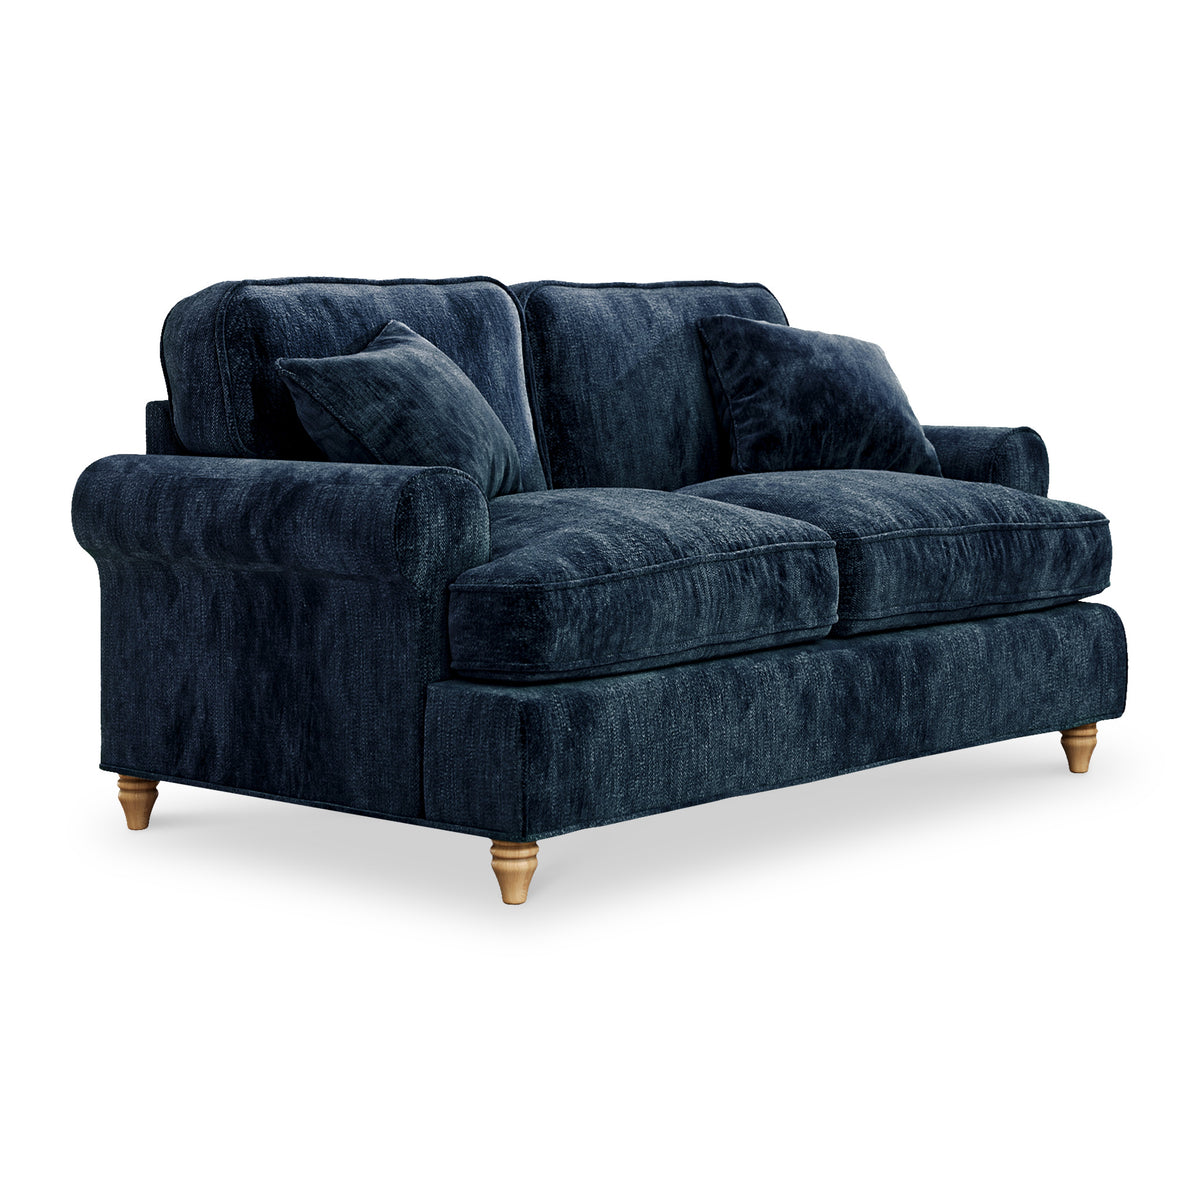 Alfie Navy Blue 2 Seater Sofa from Roseland Furniture